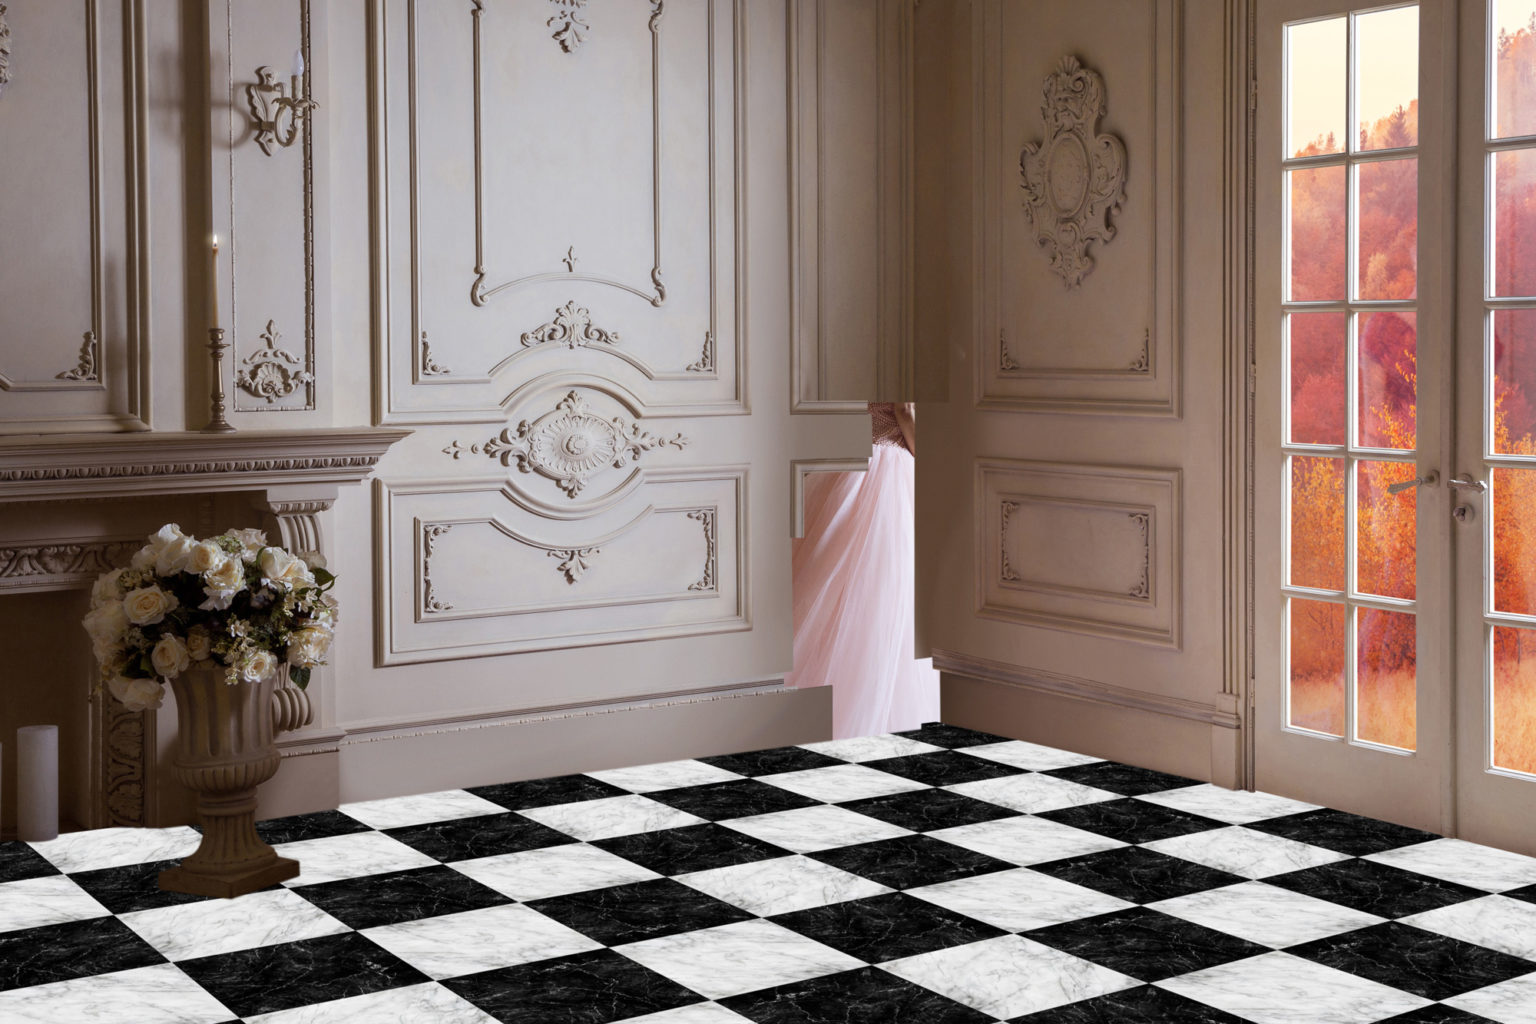 The next step was to replace the floor with a checker board tile floor.